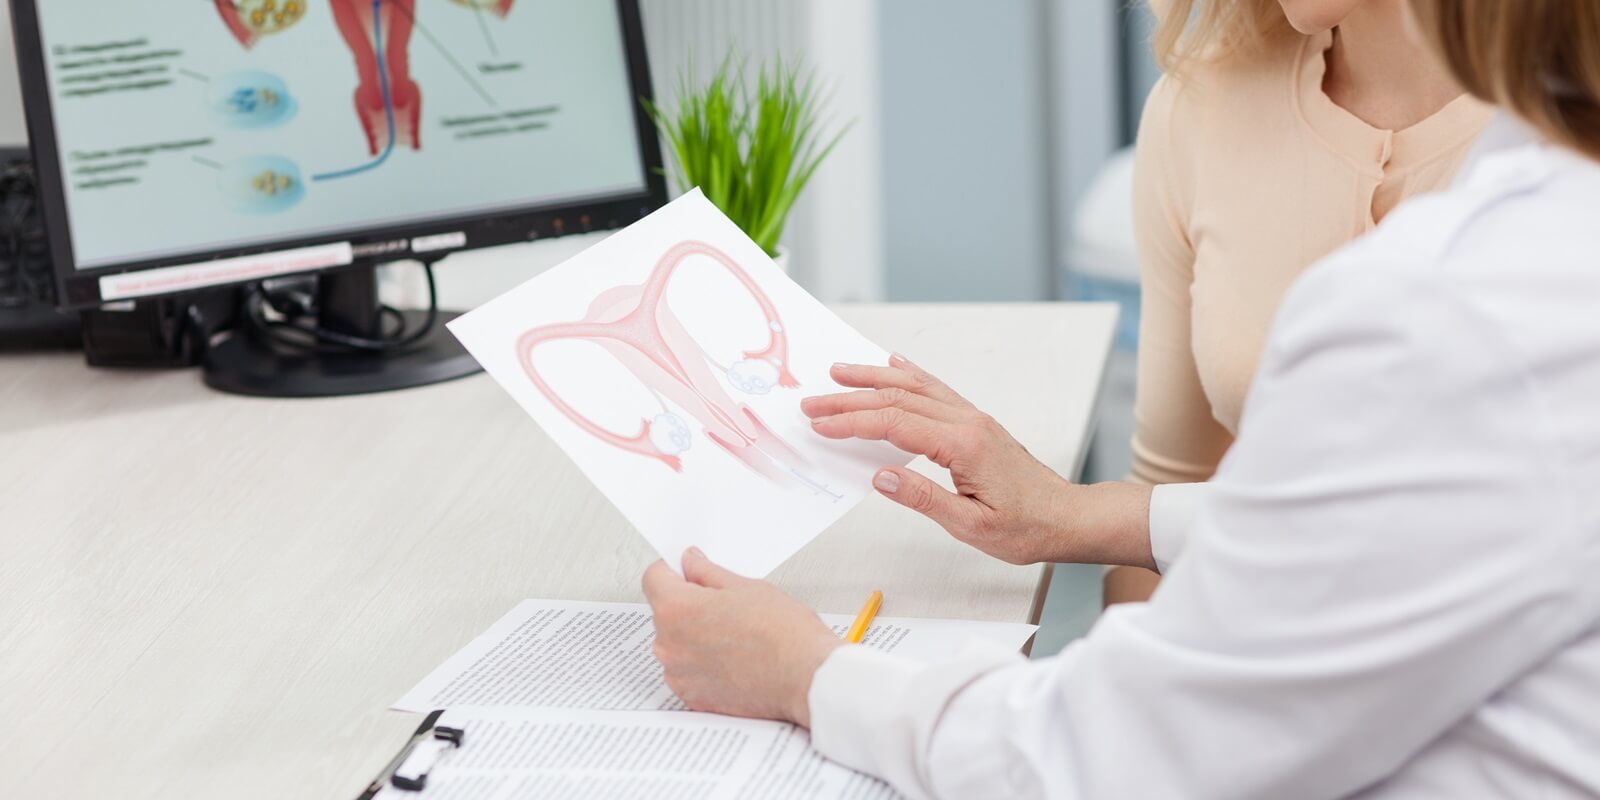 Raleigh, NC contraceptive care gynecologist reviews uterus anatomy with patient